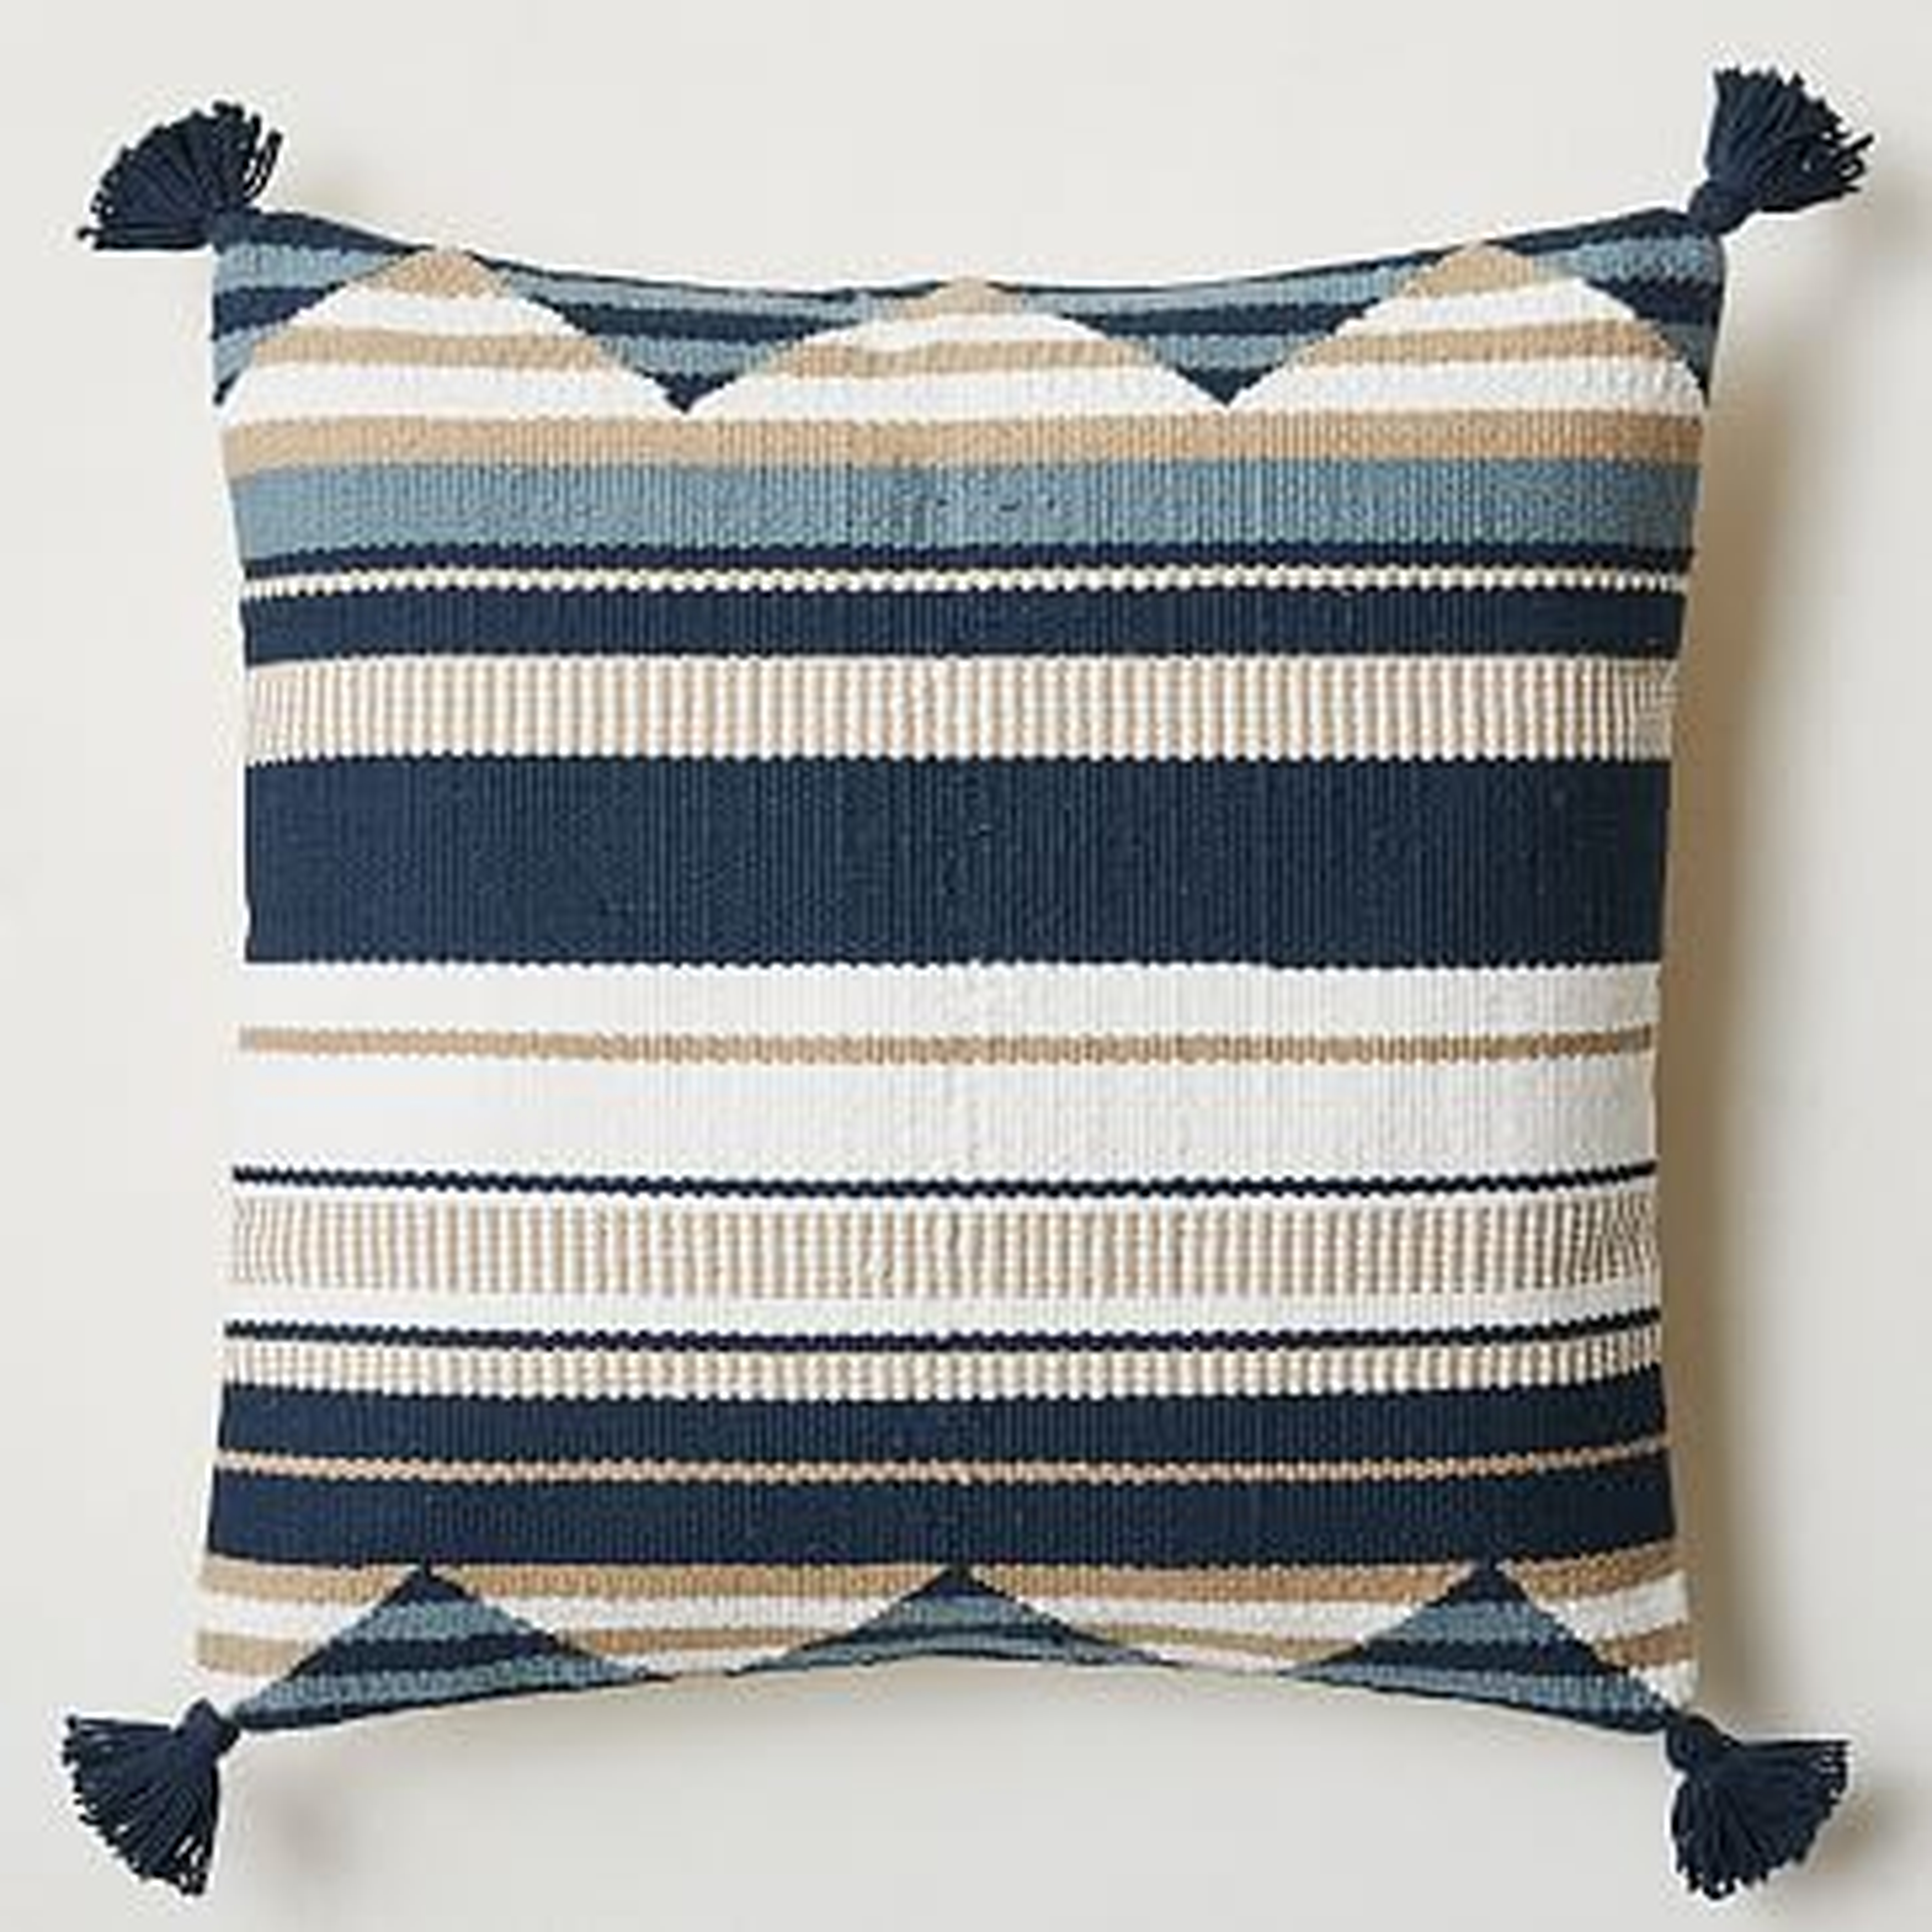 Woven Stripes Pillow Cover, 20"x20", Midnight, Set of 2 - West Elm